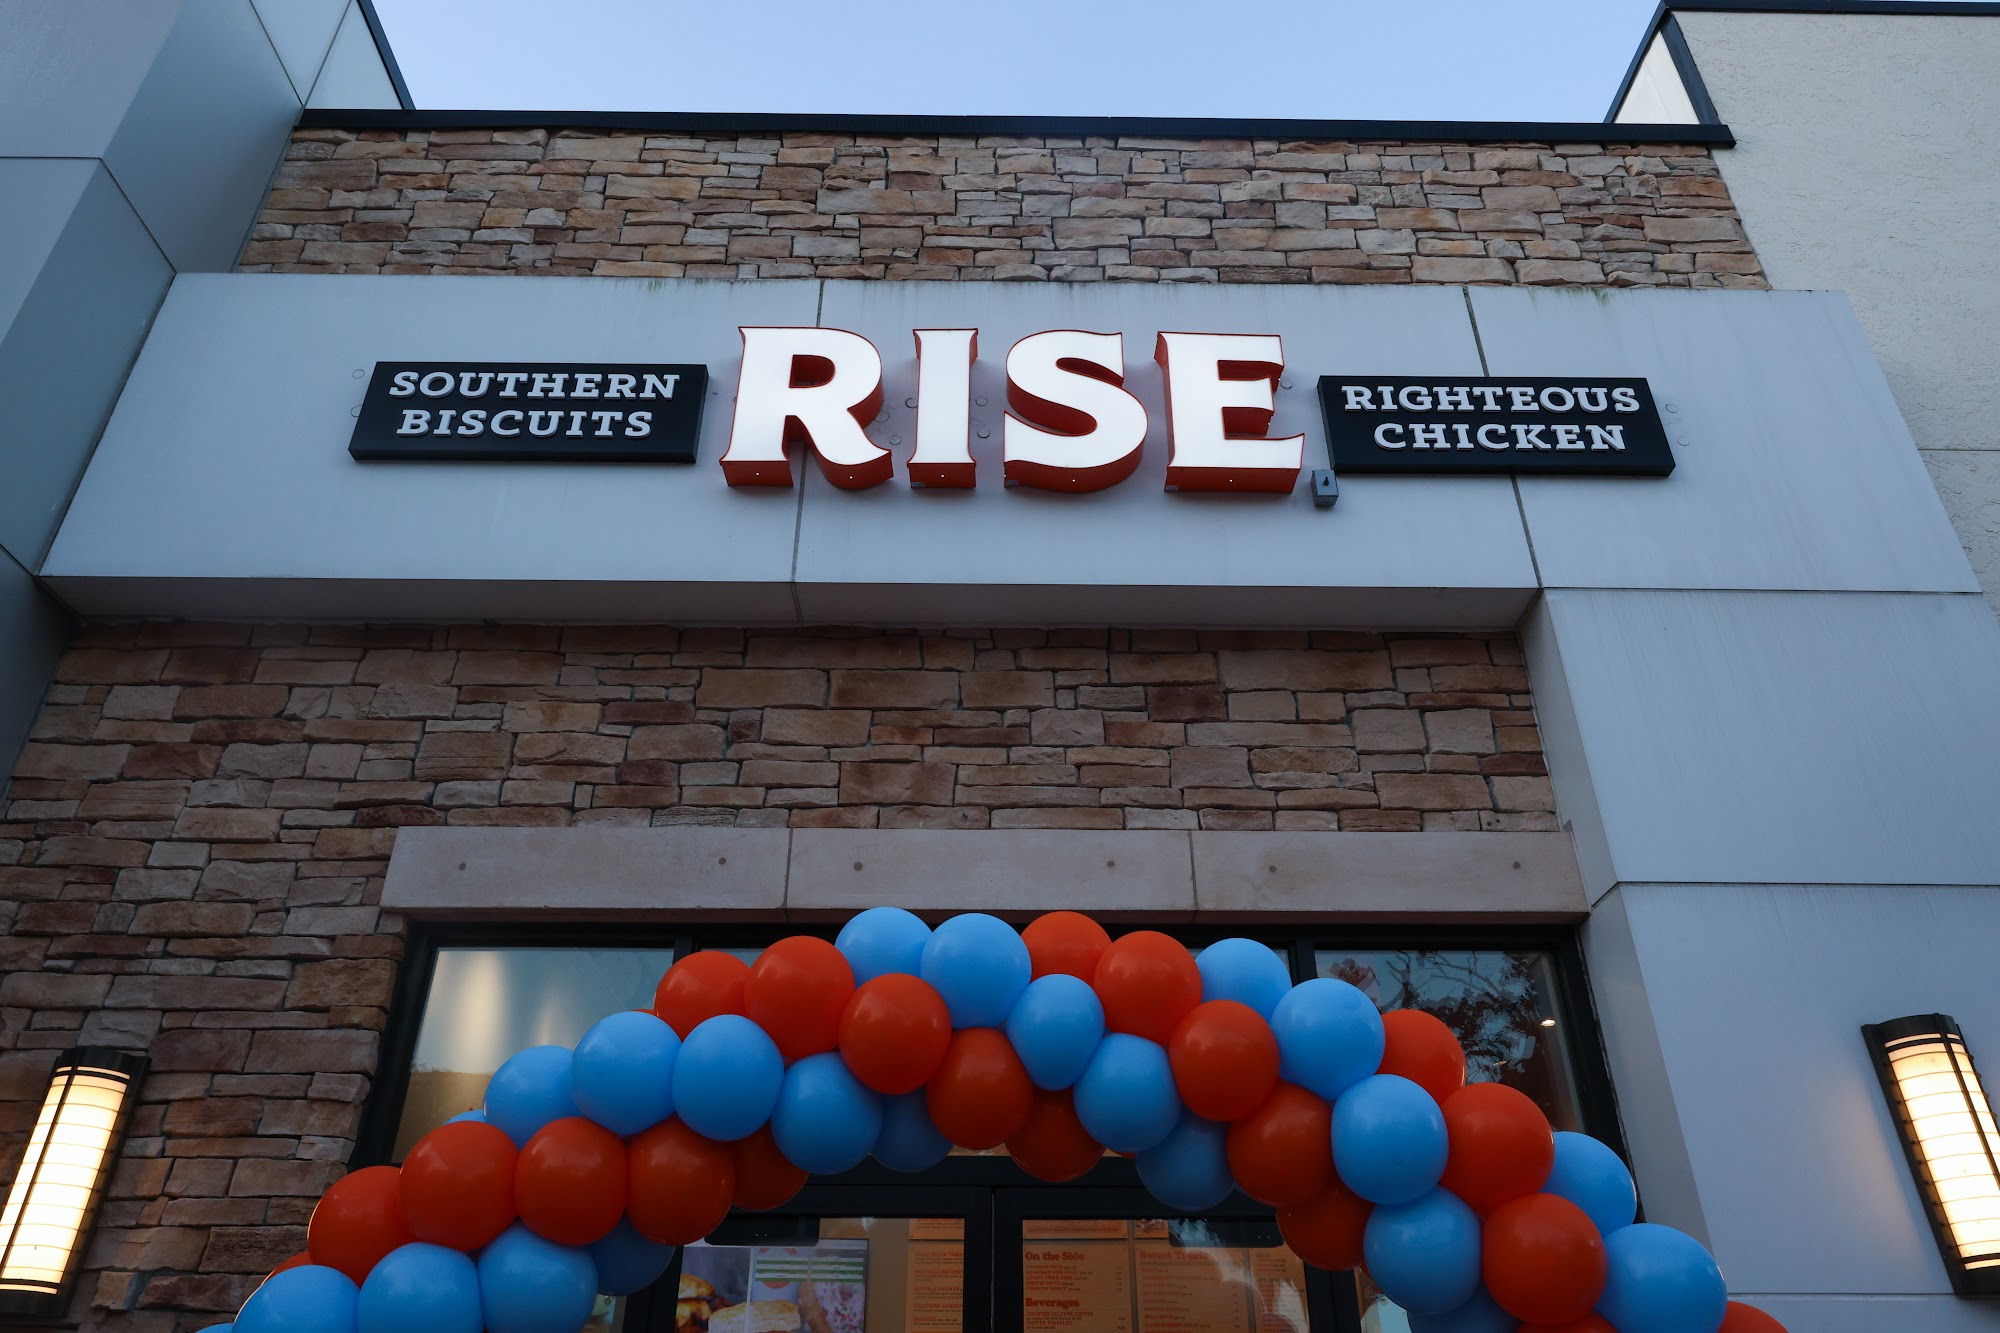 Rise Southern Biscuits Righteous Chicken